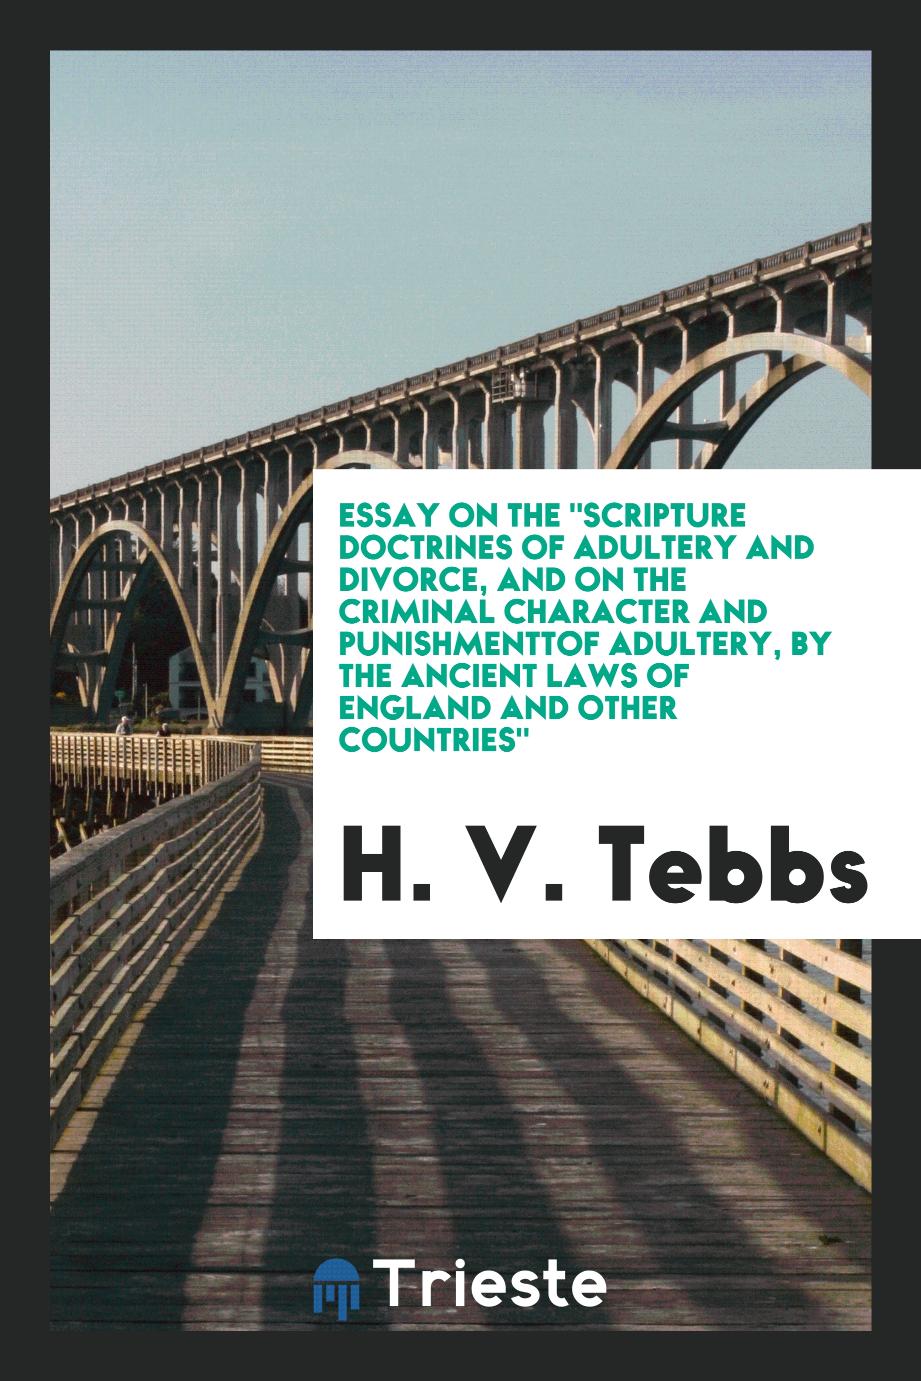 Essay on The "Scripture Doctrines of Adultery and Divorce, and on the Criminal Character and Punishmenttof Adultery, by the Ancient Laws of England and Other Countries"